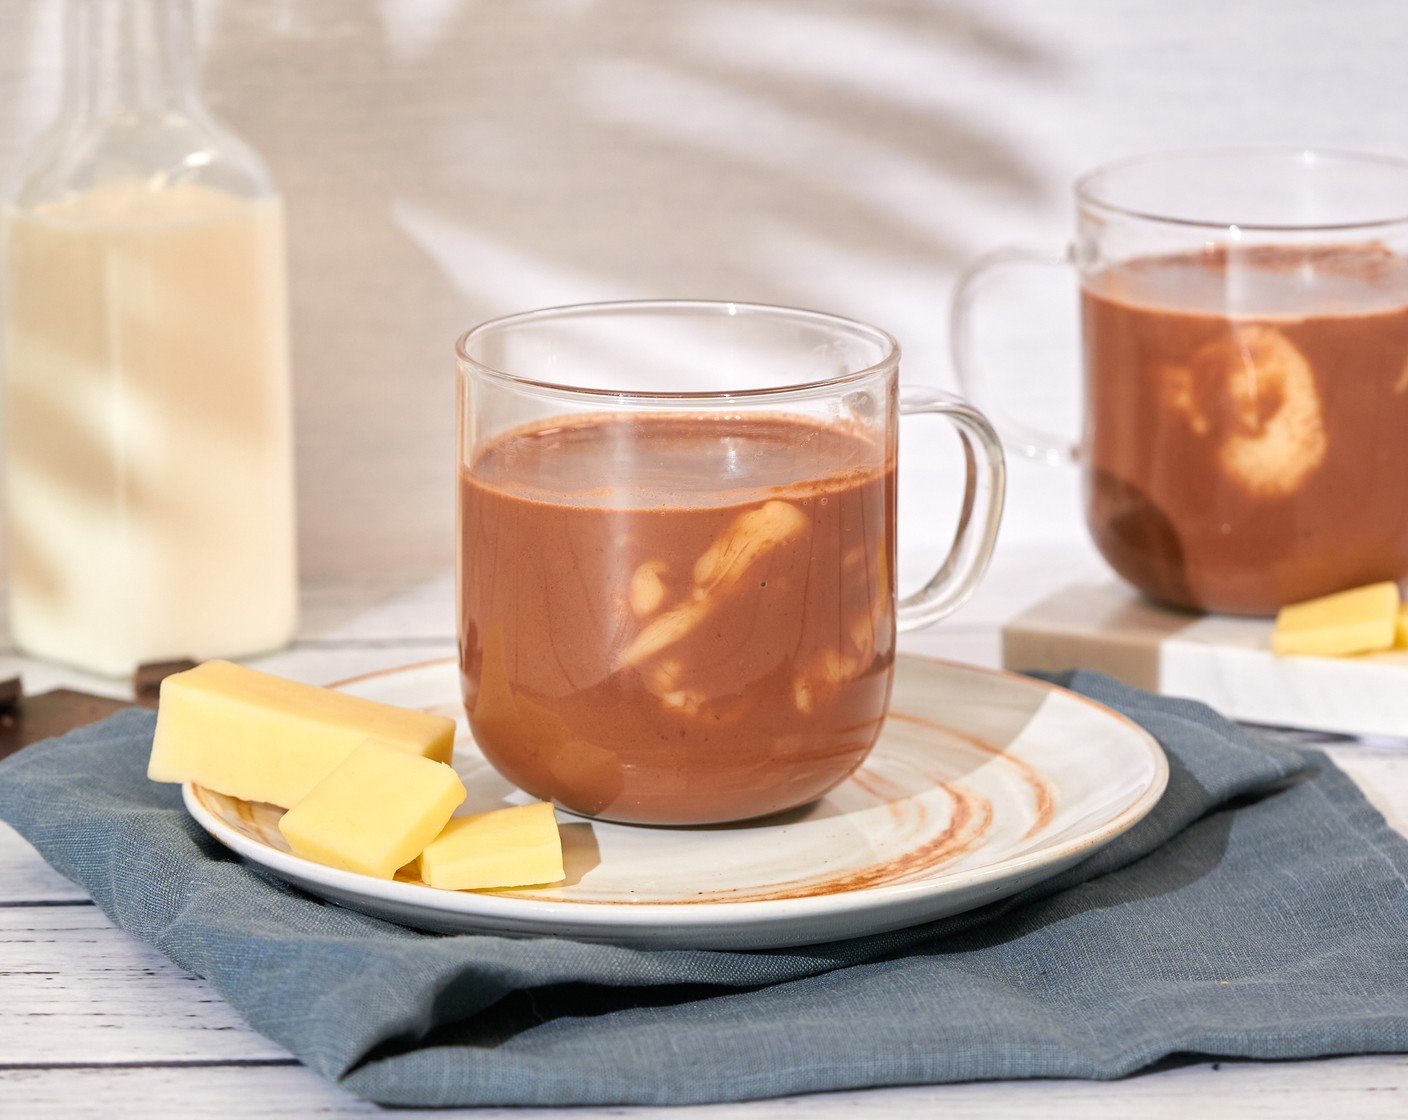 step 5 Evenly pour the hot chocolate mixture into each mug. Let the cheese melt for a bit before serving with a spoon.